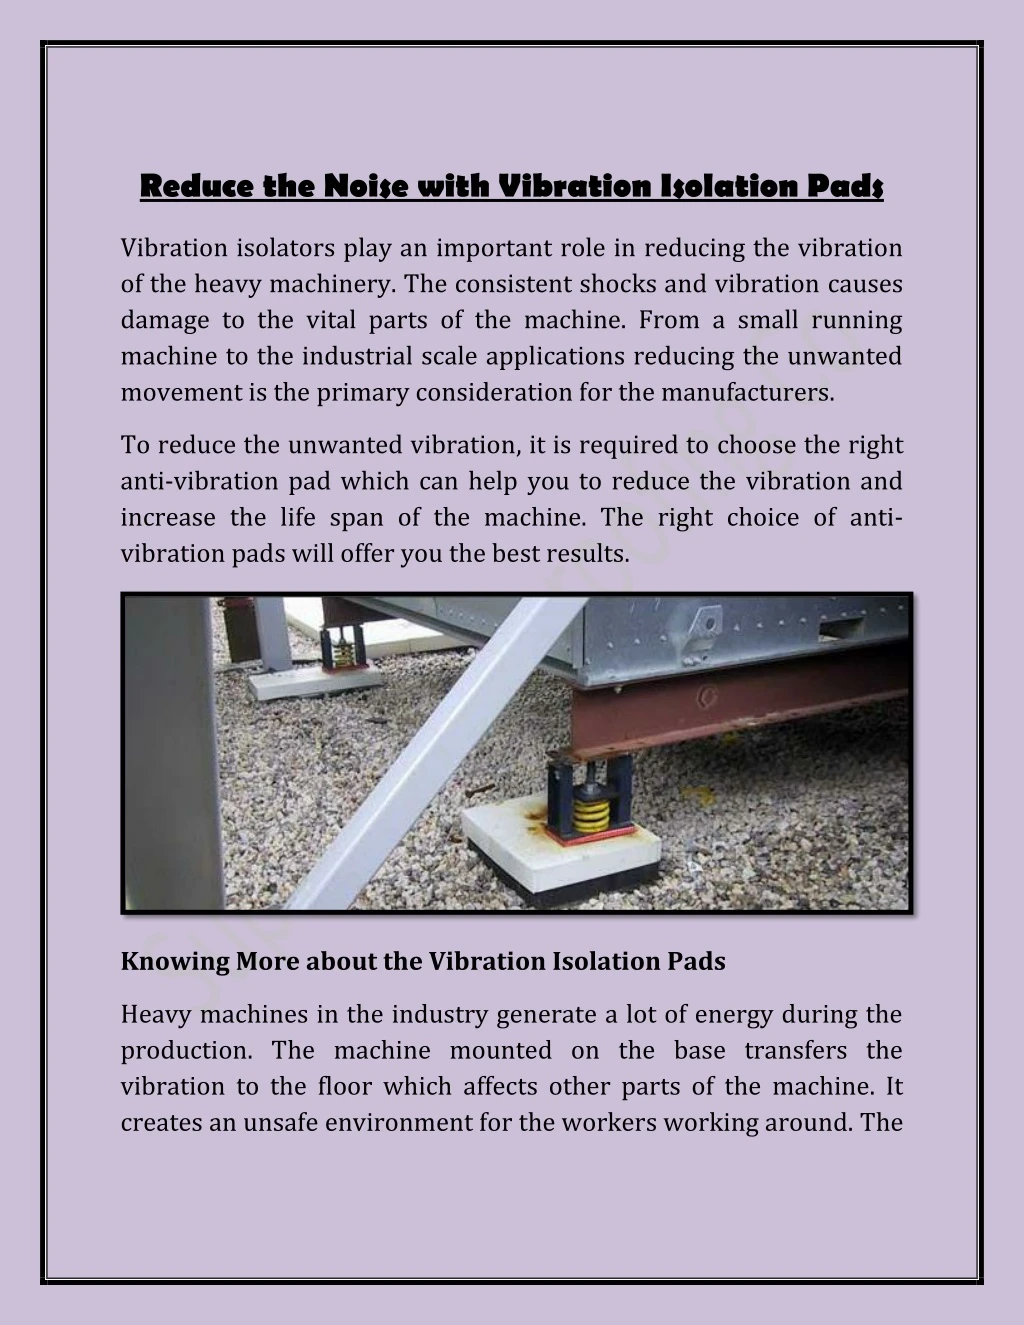 reduce the noise with vibration isolation pads